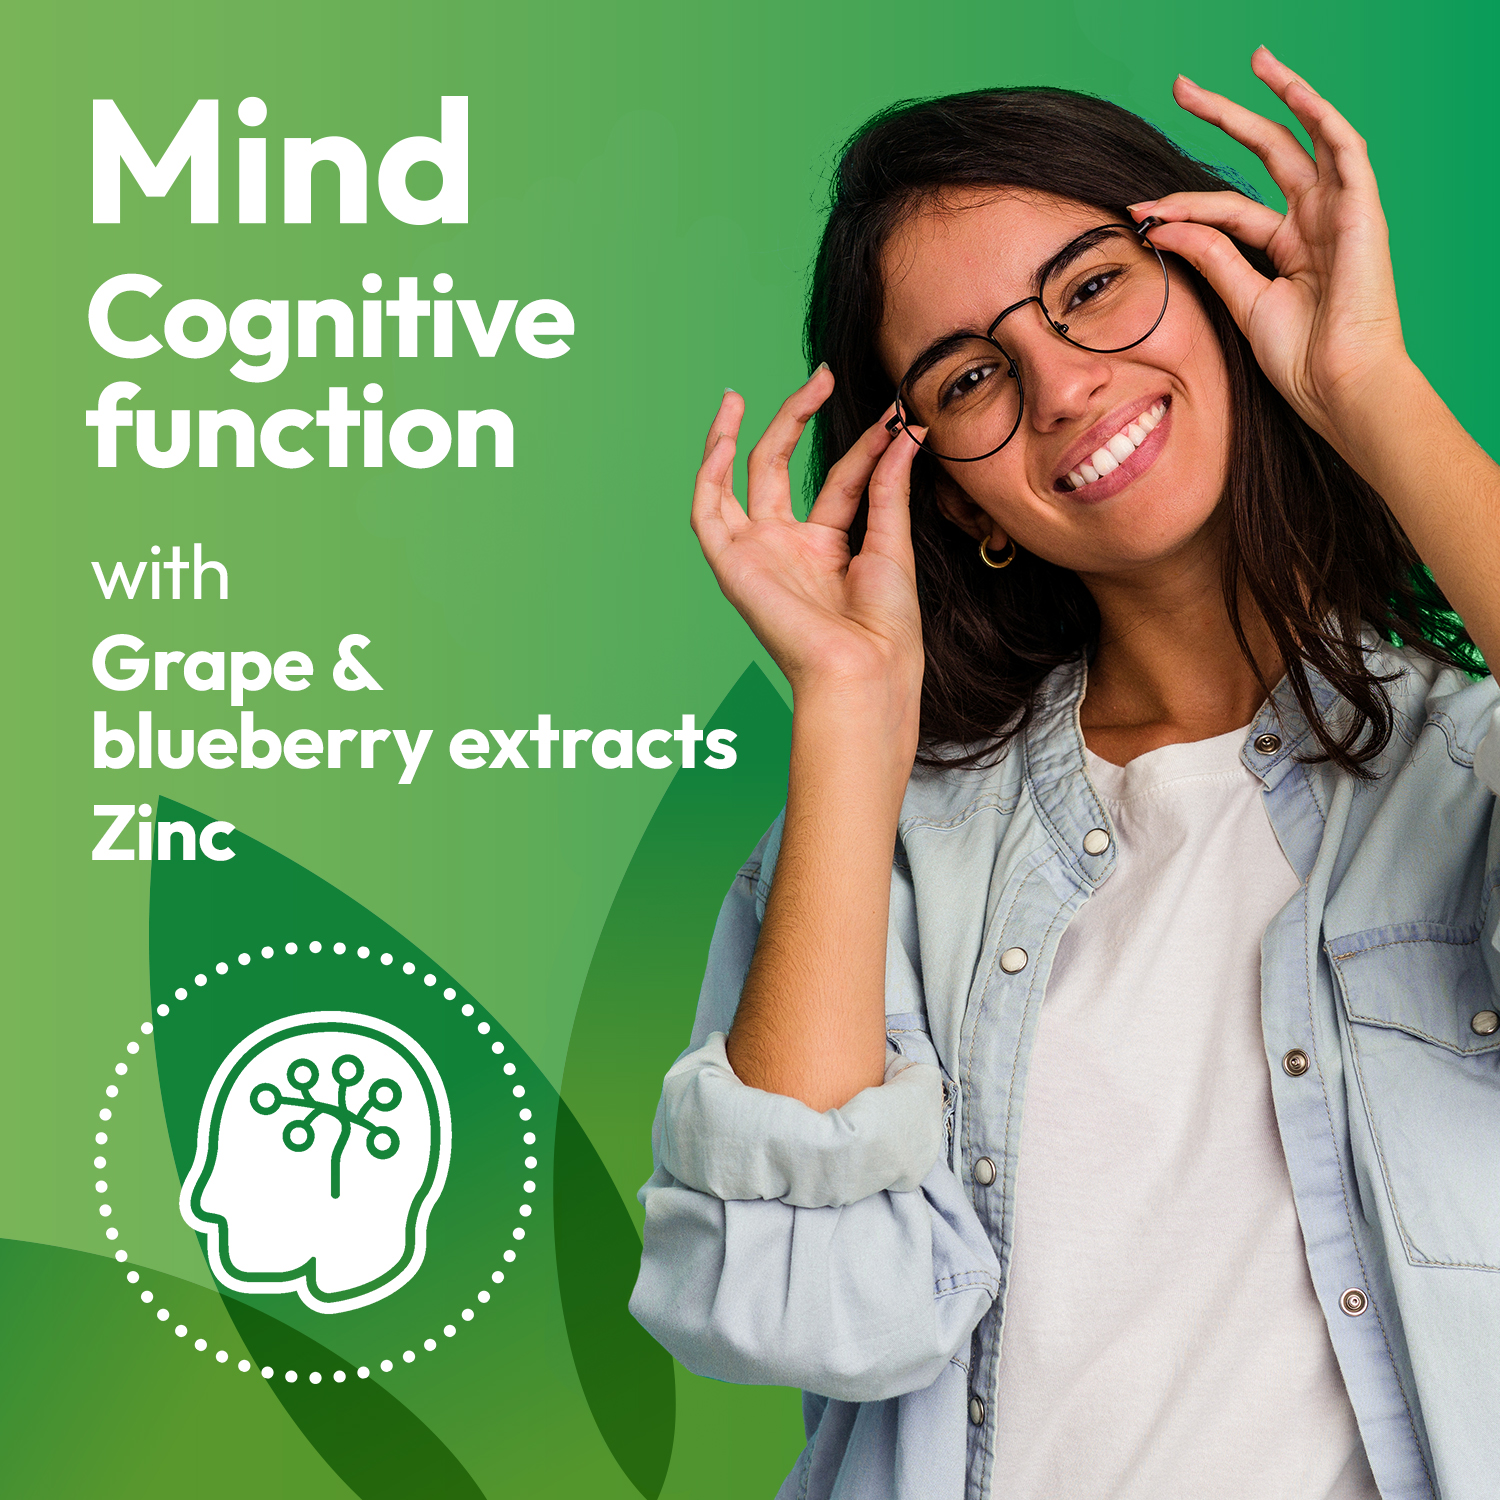 Mind cognitive function with grape & blueberry extracts zinc.